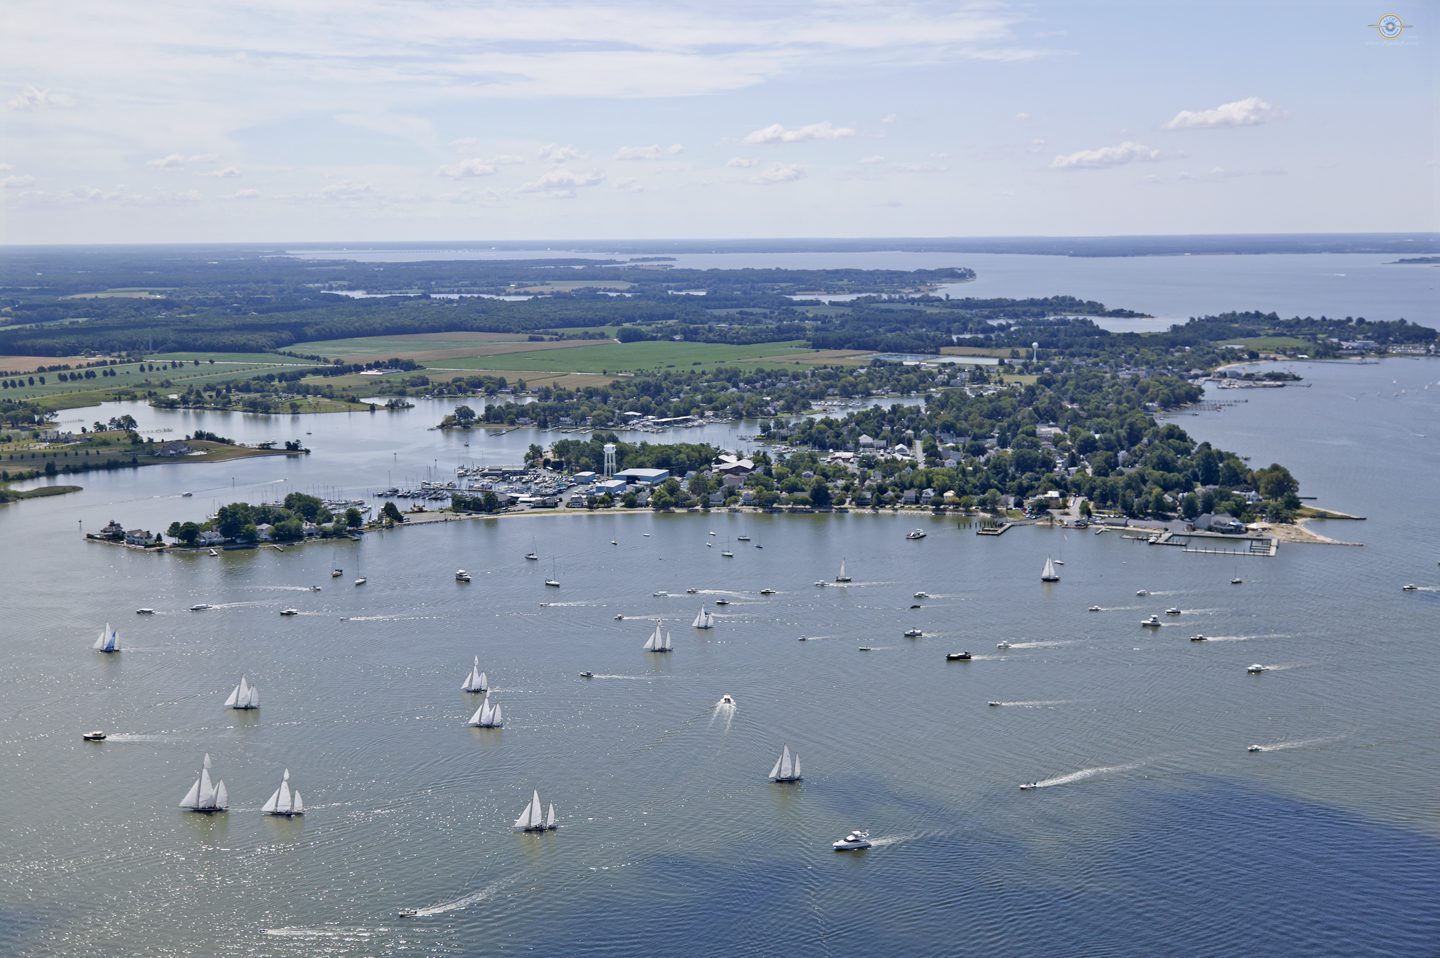 A large body of water with many small boats in it.